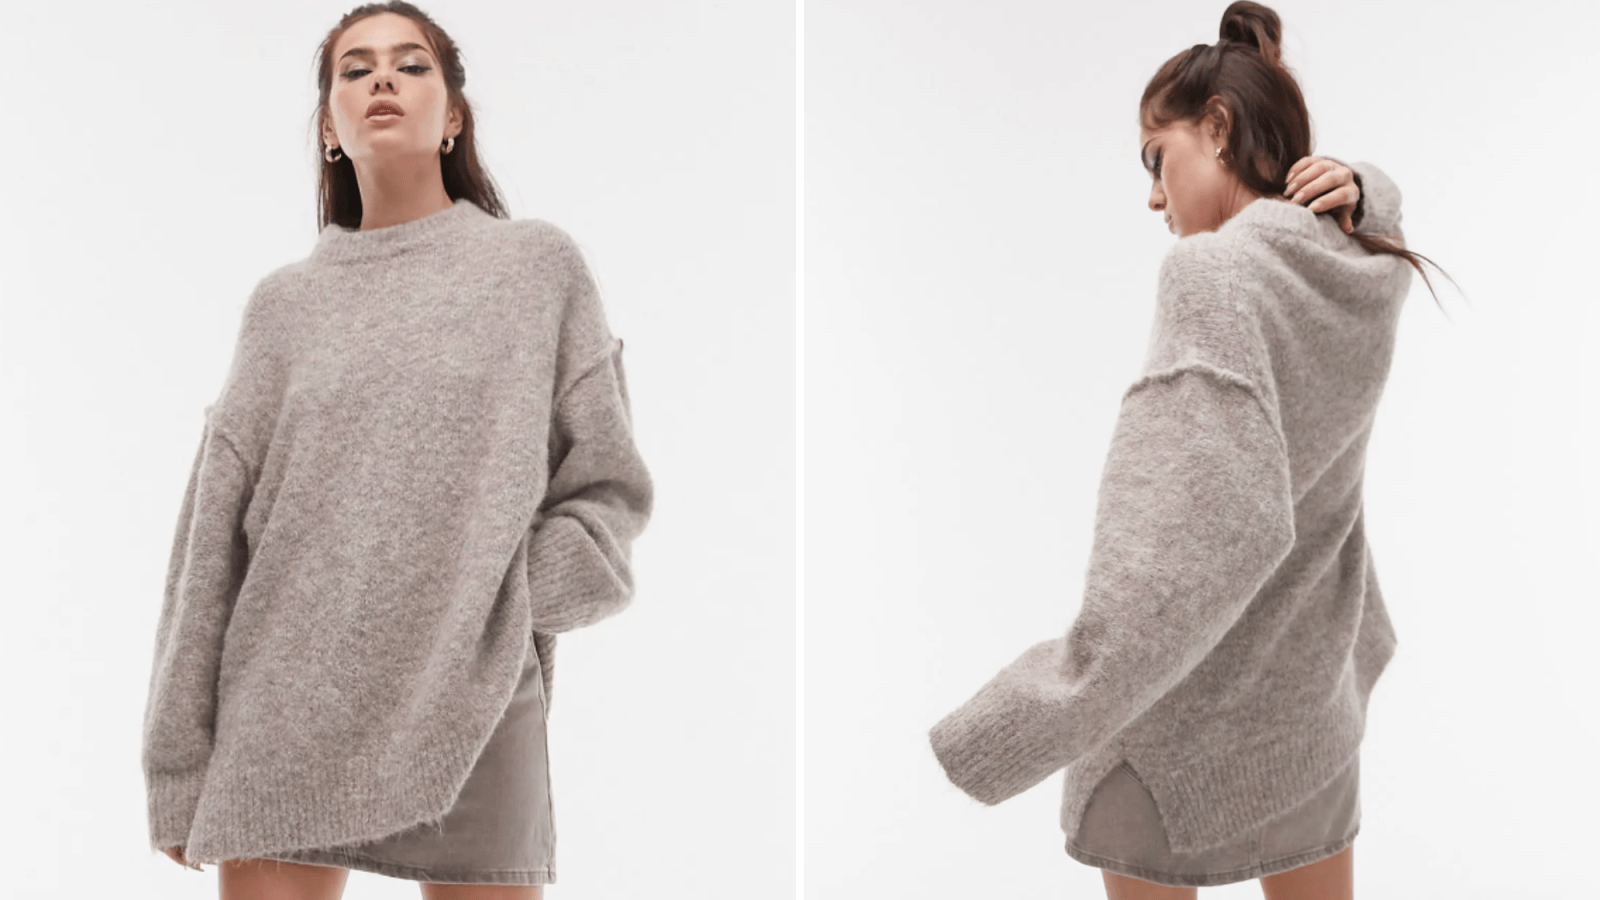 Topshop Oversize Pullover Sweater